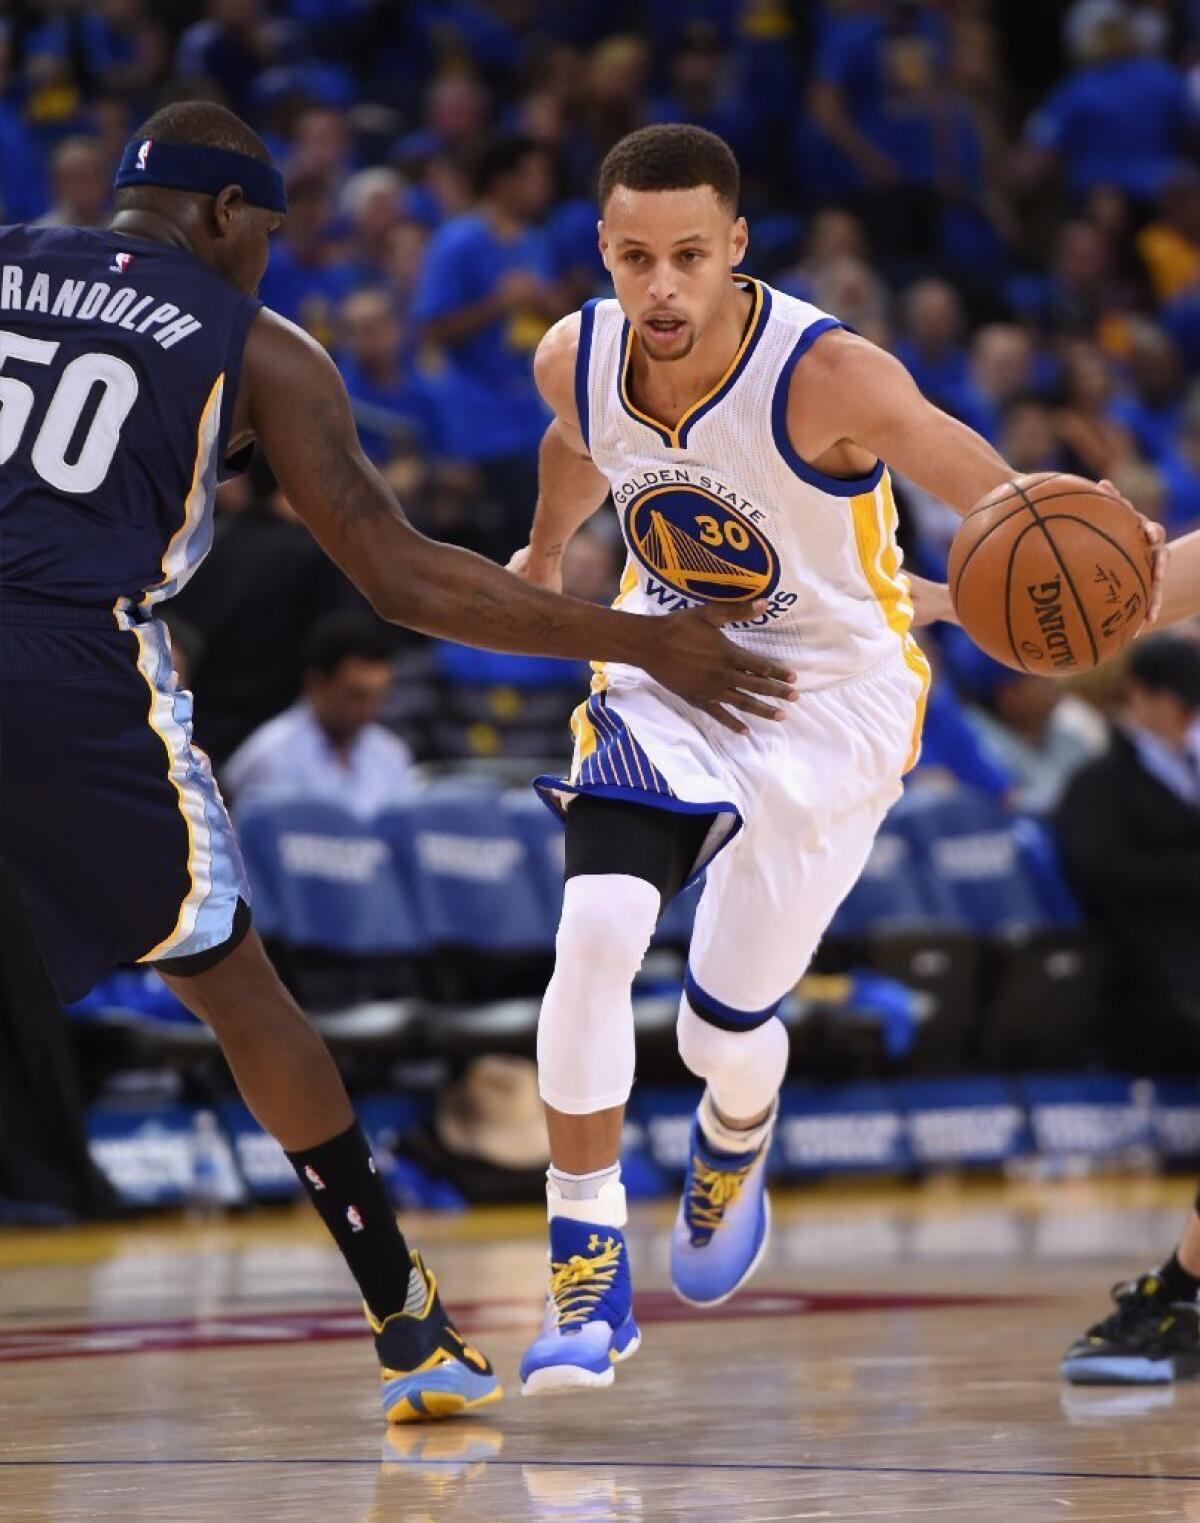 Golden State Warriors player Stephen Curry, whose name adorns an Under Armour line of sports apparel, dribbles the ball against Zach Randolph of the Memphis Grizzlies at Oracle Arena on April 13 in Oakland.